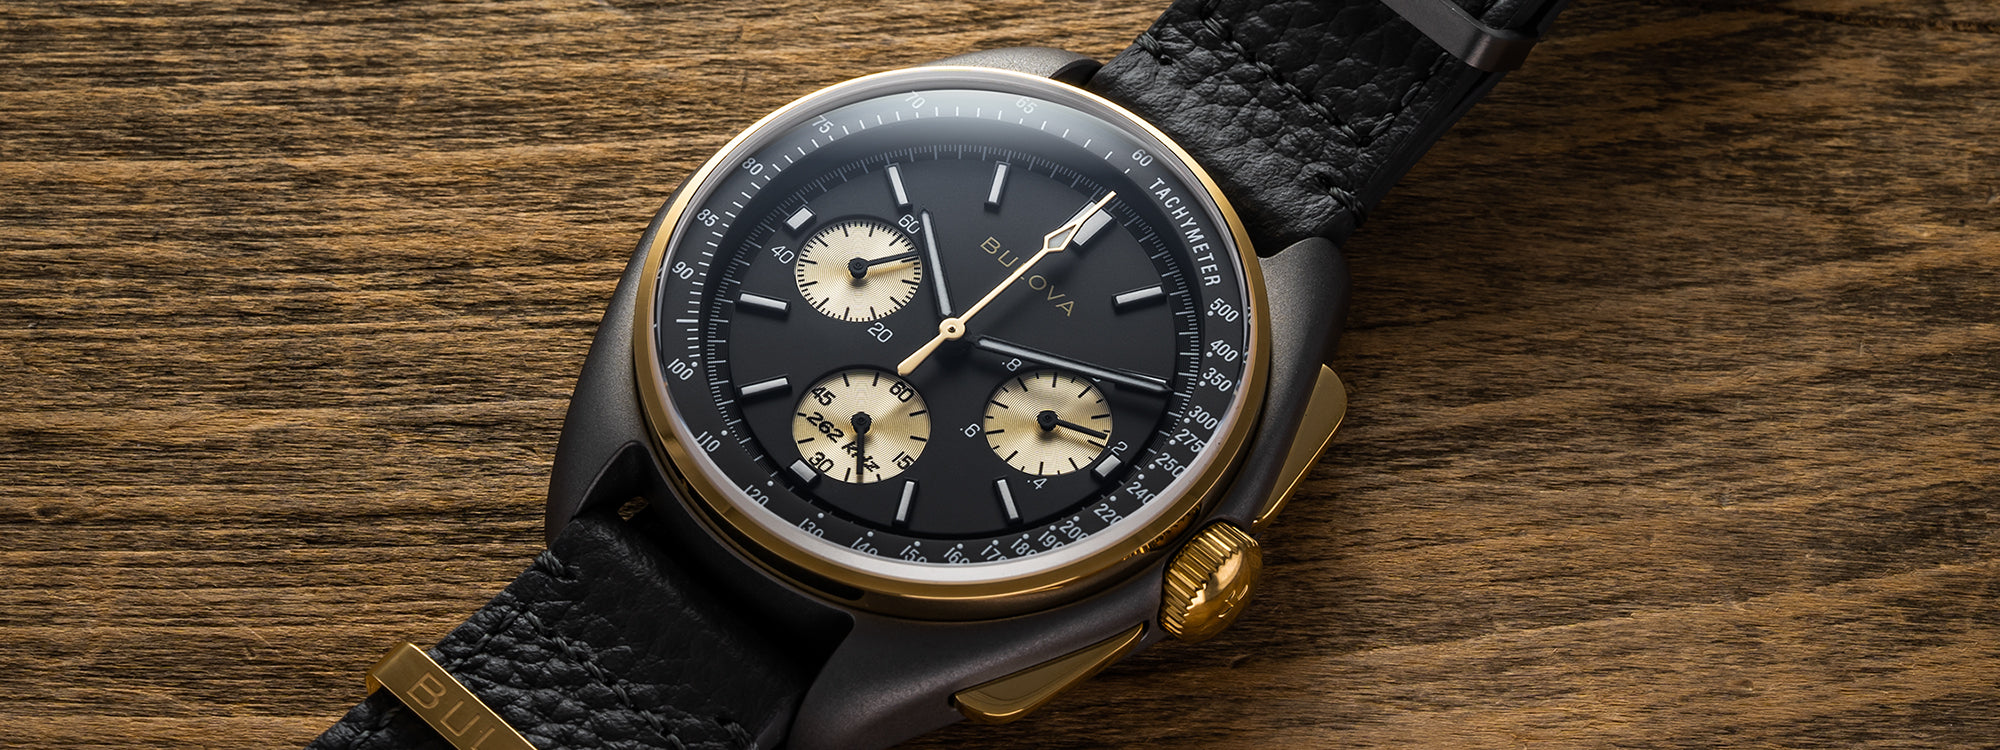 What You Should Know Before Buying a Quartz Watch